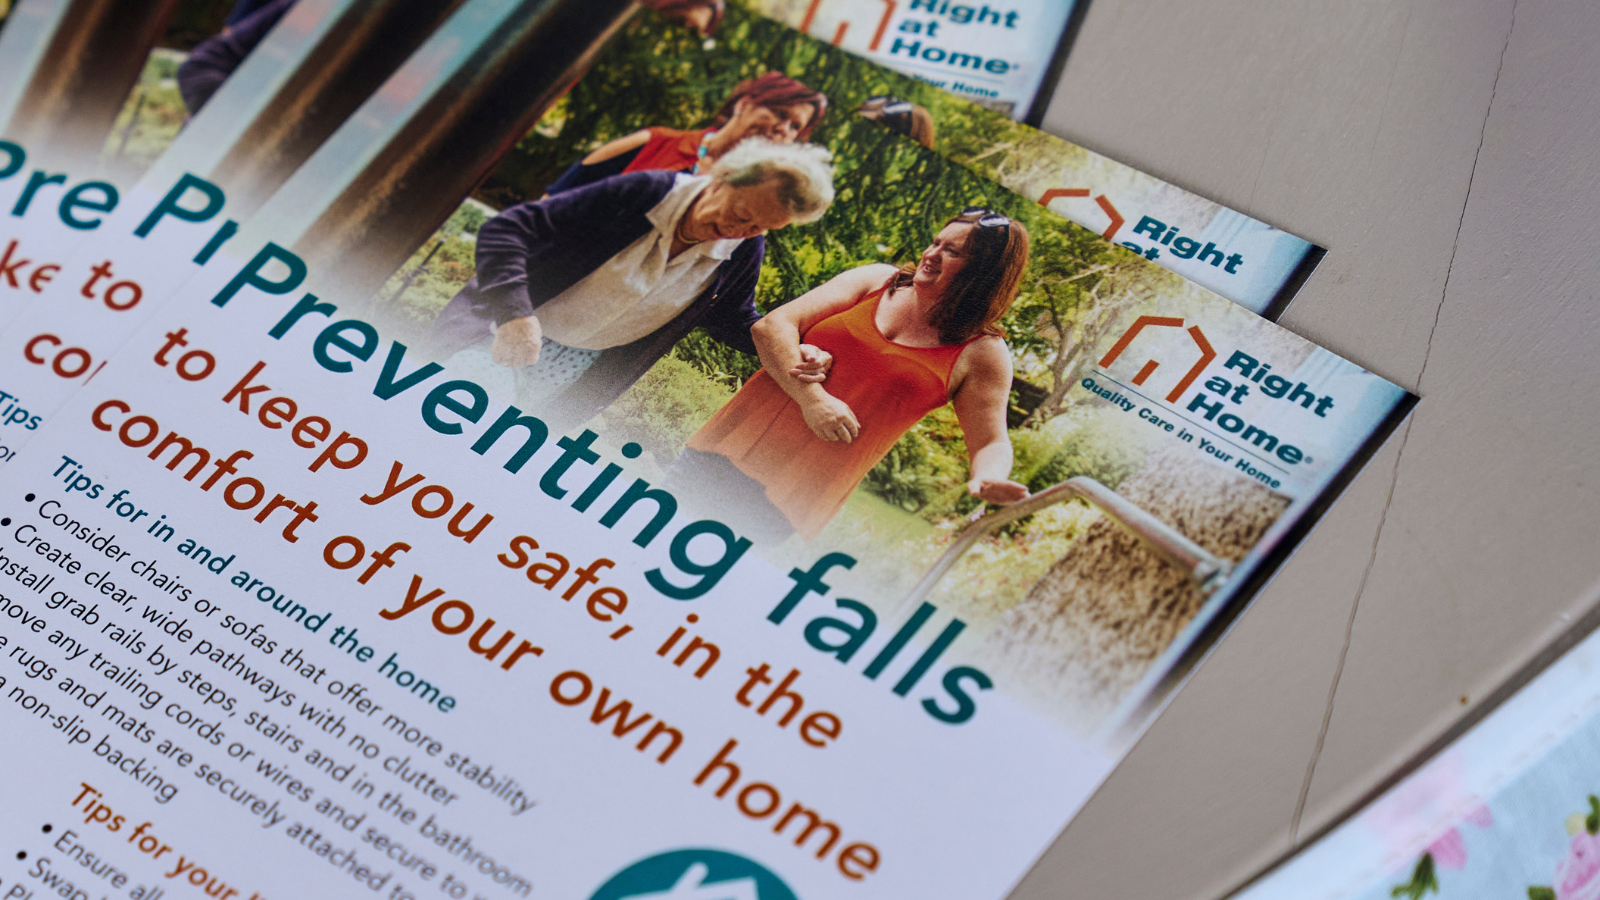 Fall prevention leaflets offering tips in the redhill and reigate community